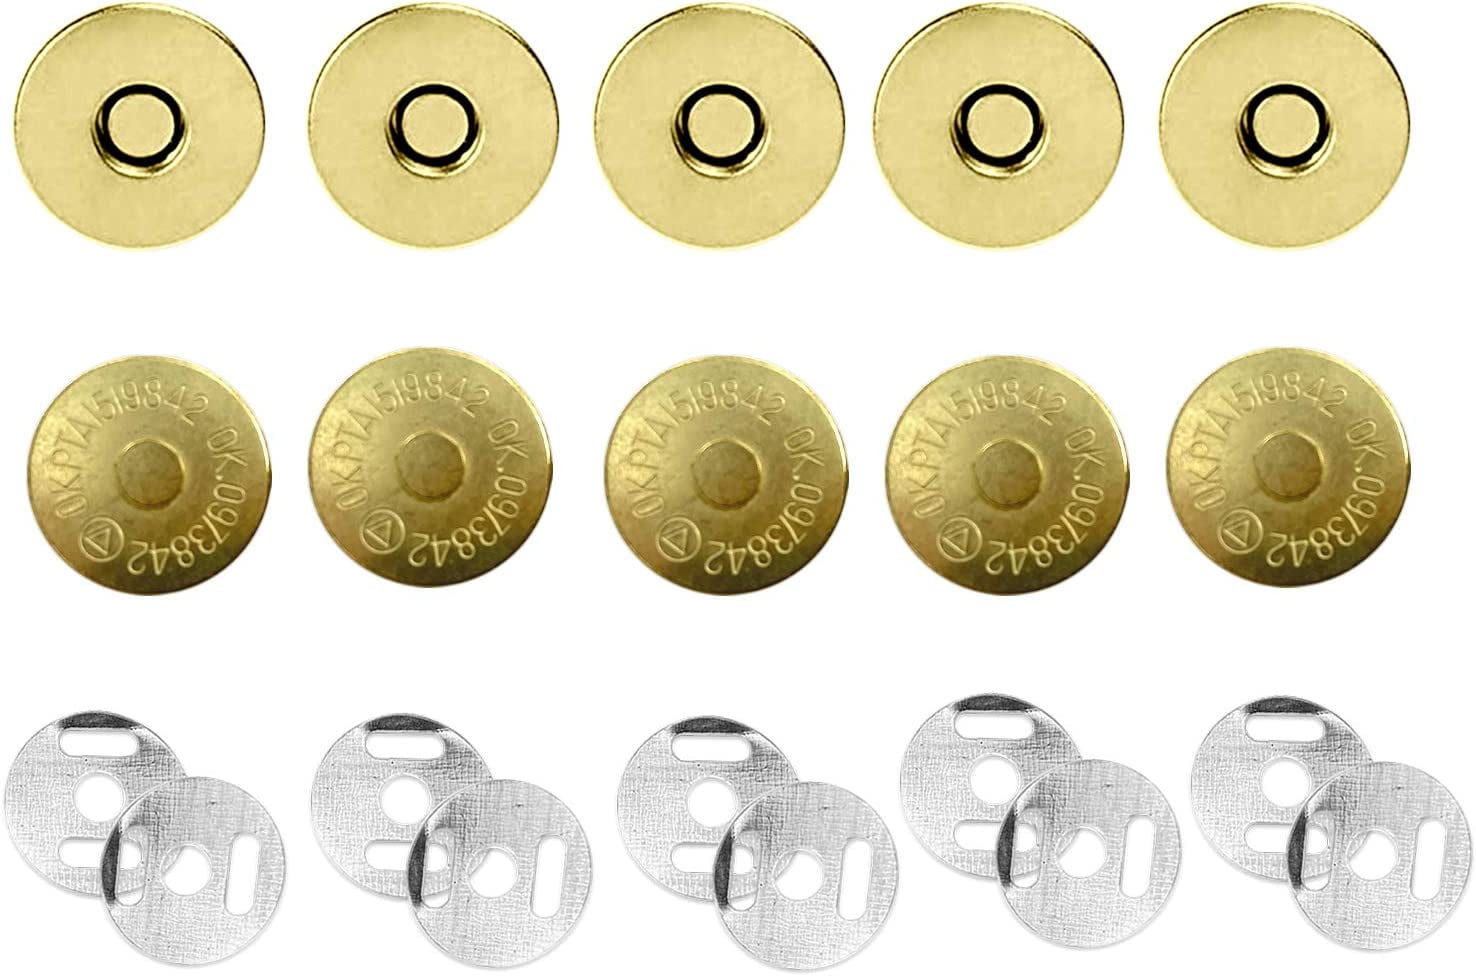 Trimming Shop Double Sided Brass Press Studs 4 Part, Rust - Proof & Durable  Snap Fasteners for DIY L…See more Trimming Shop Double Sided Brass Press